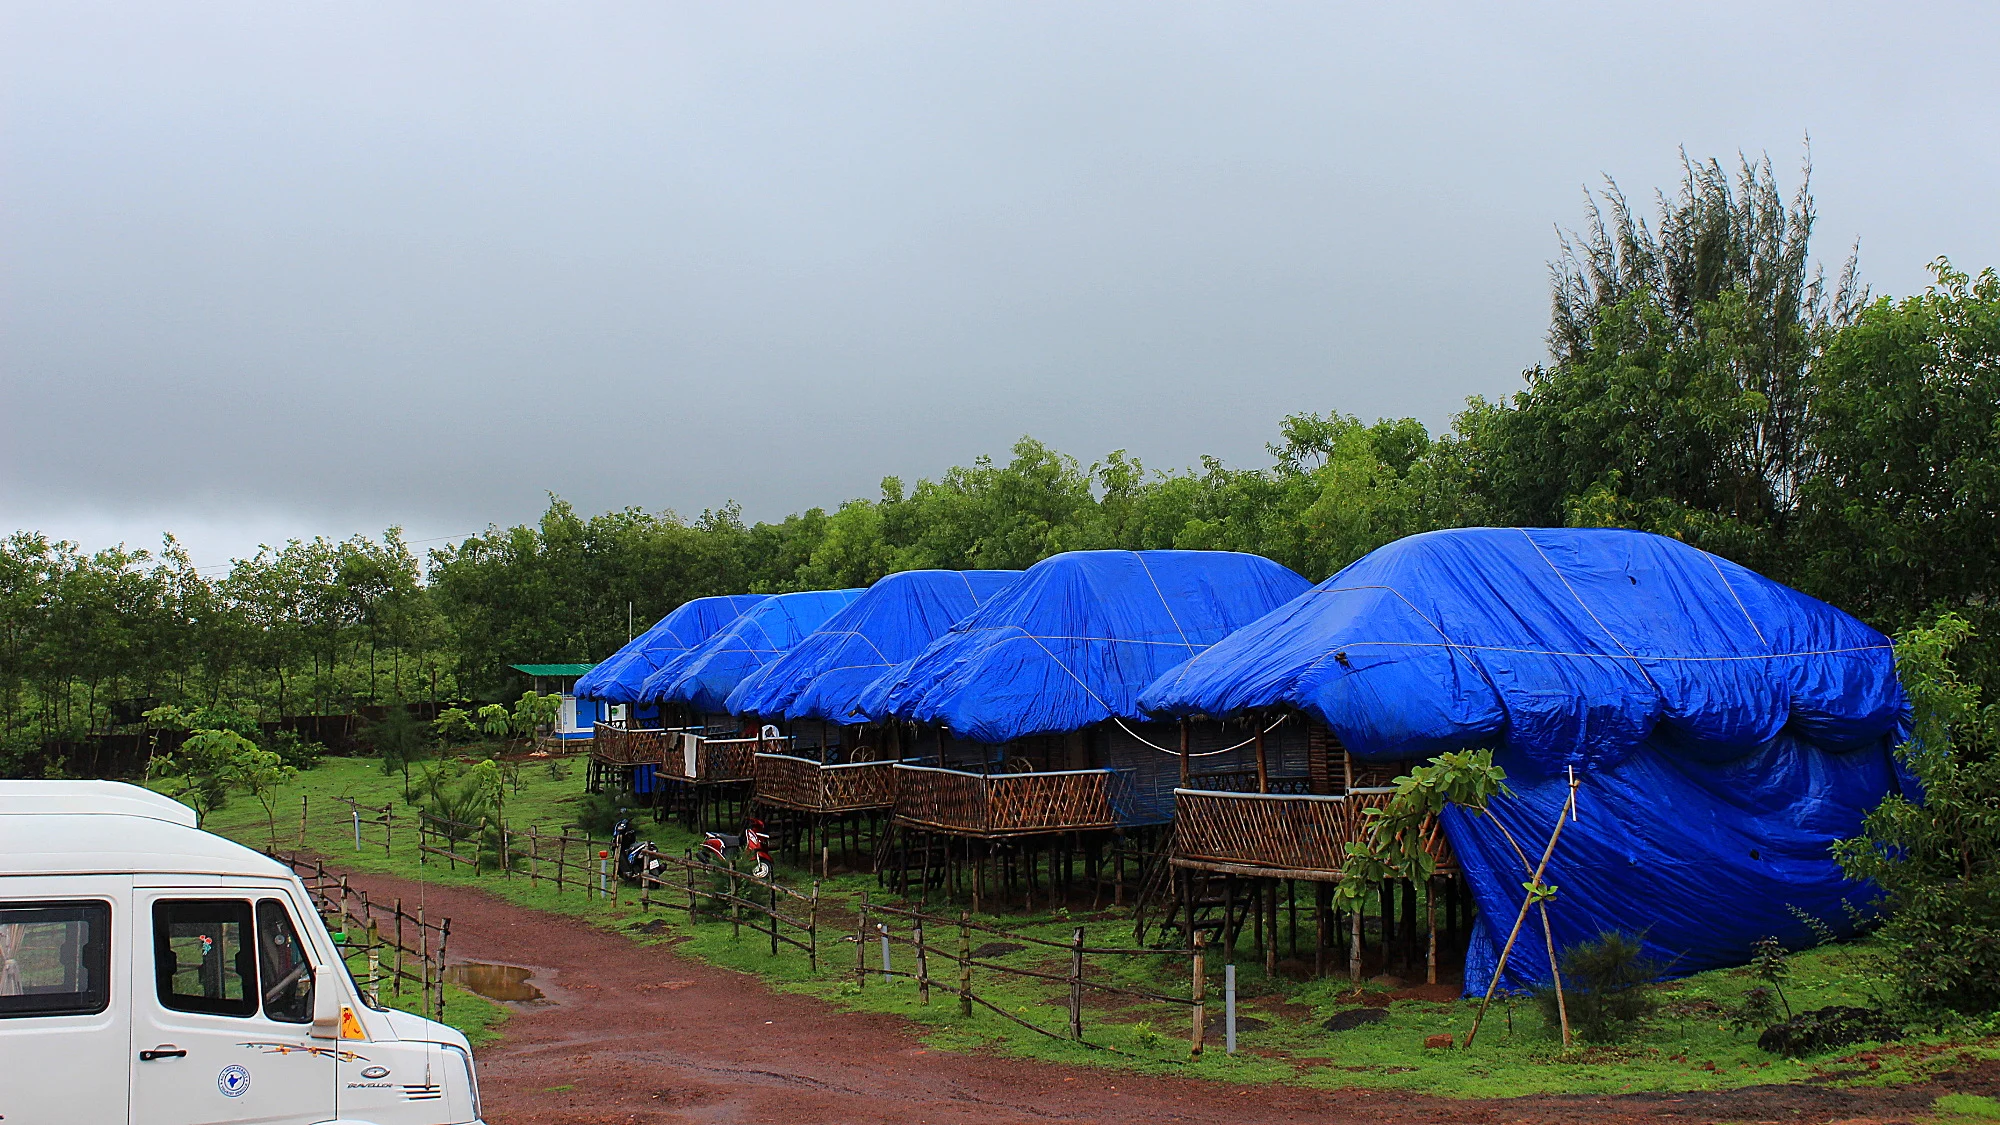 The bungalows of Zostel Gokarna covered with blue tarps for the rain during the Monsoon season.